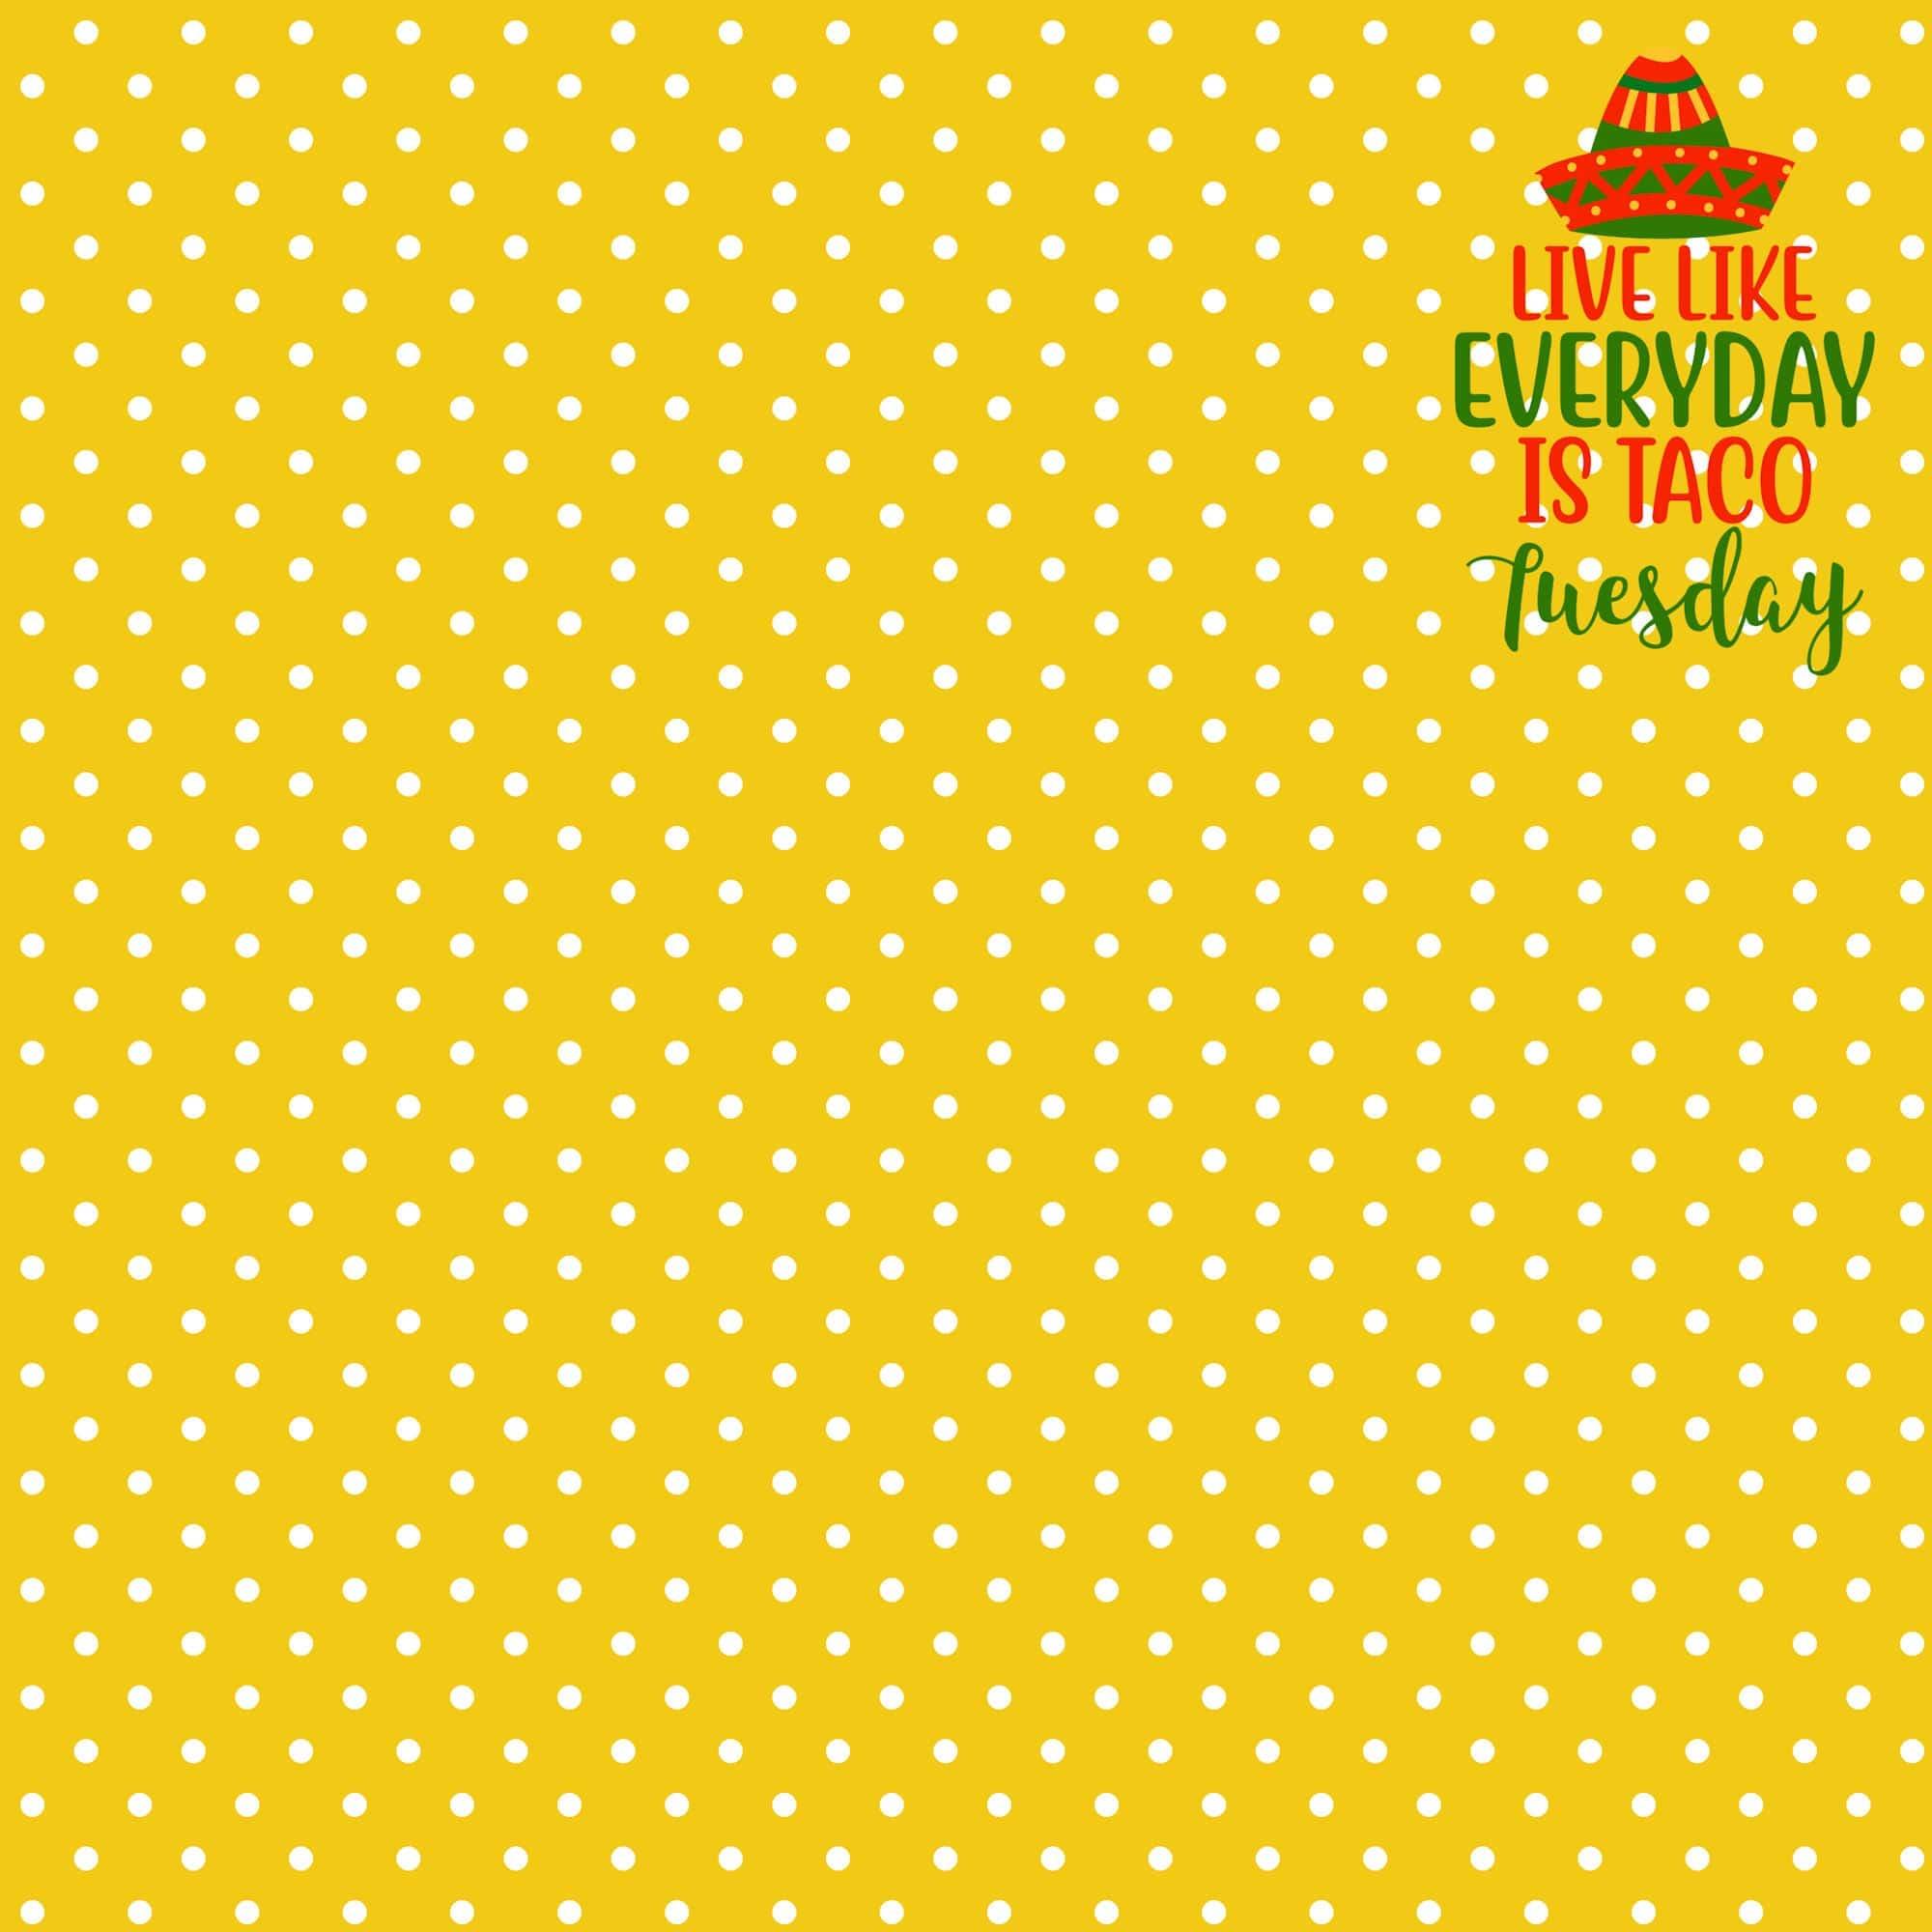 Just Fun Collection Taco Tuesday 12 x 12 Double-Sided Scrapbook Paper by SSC Designs - Scrapbook Supply Companies